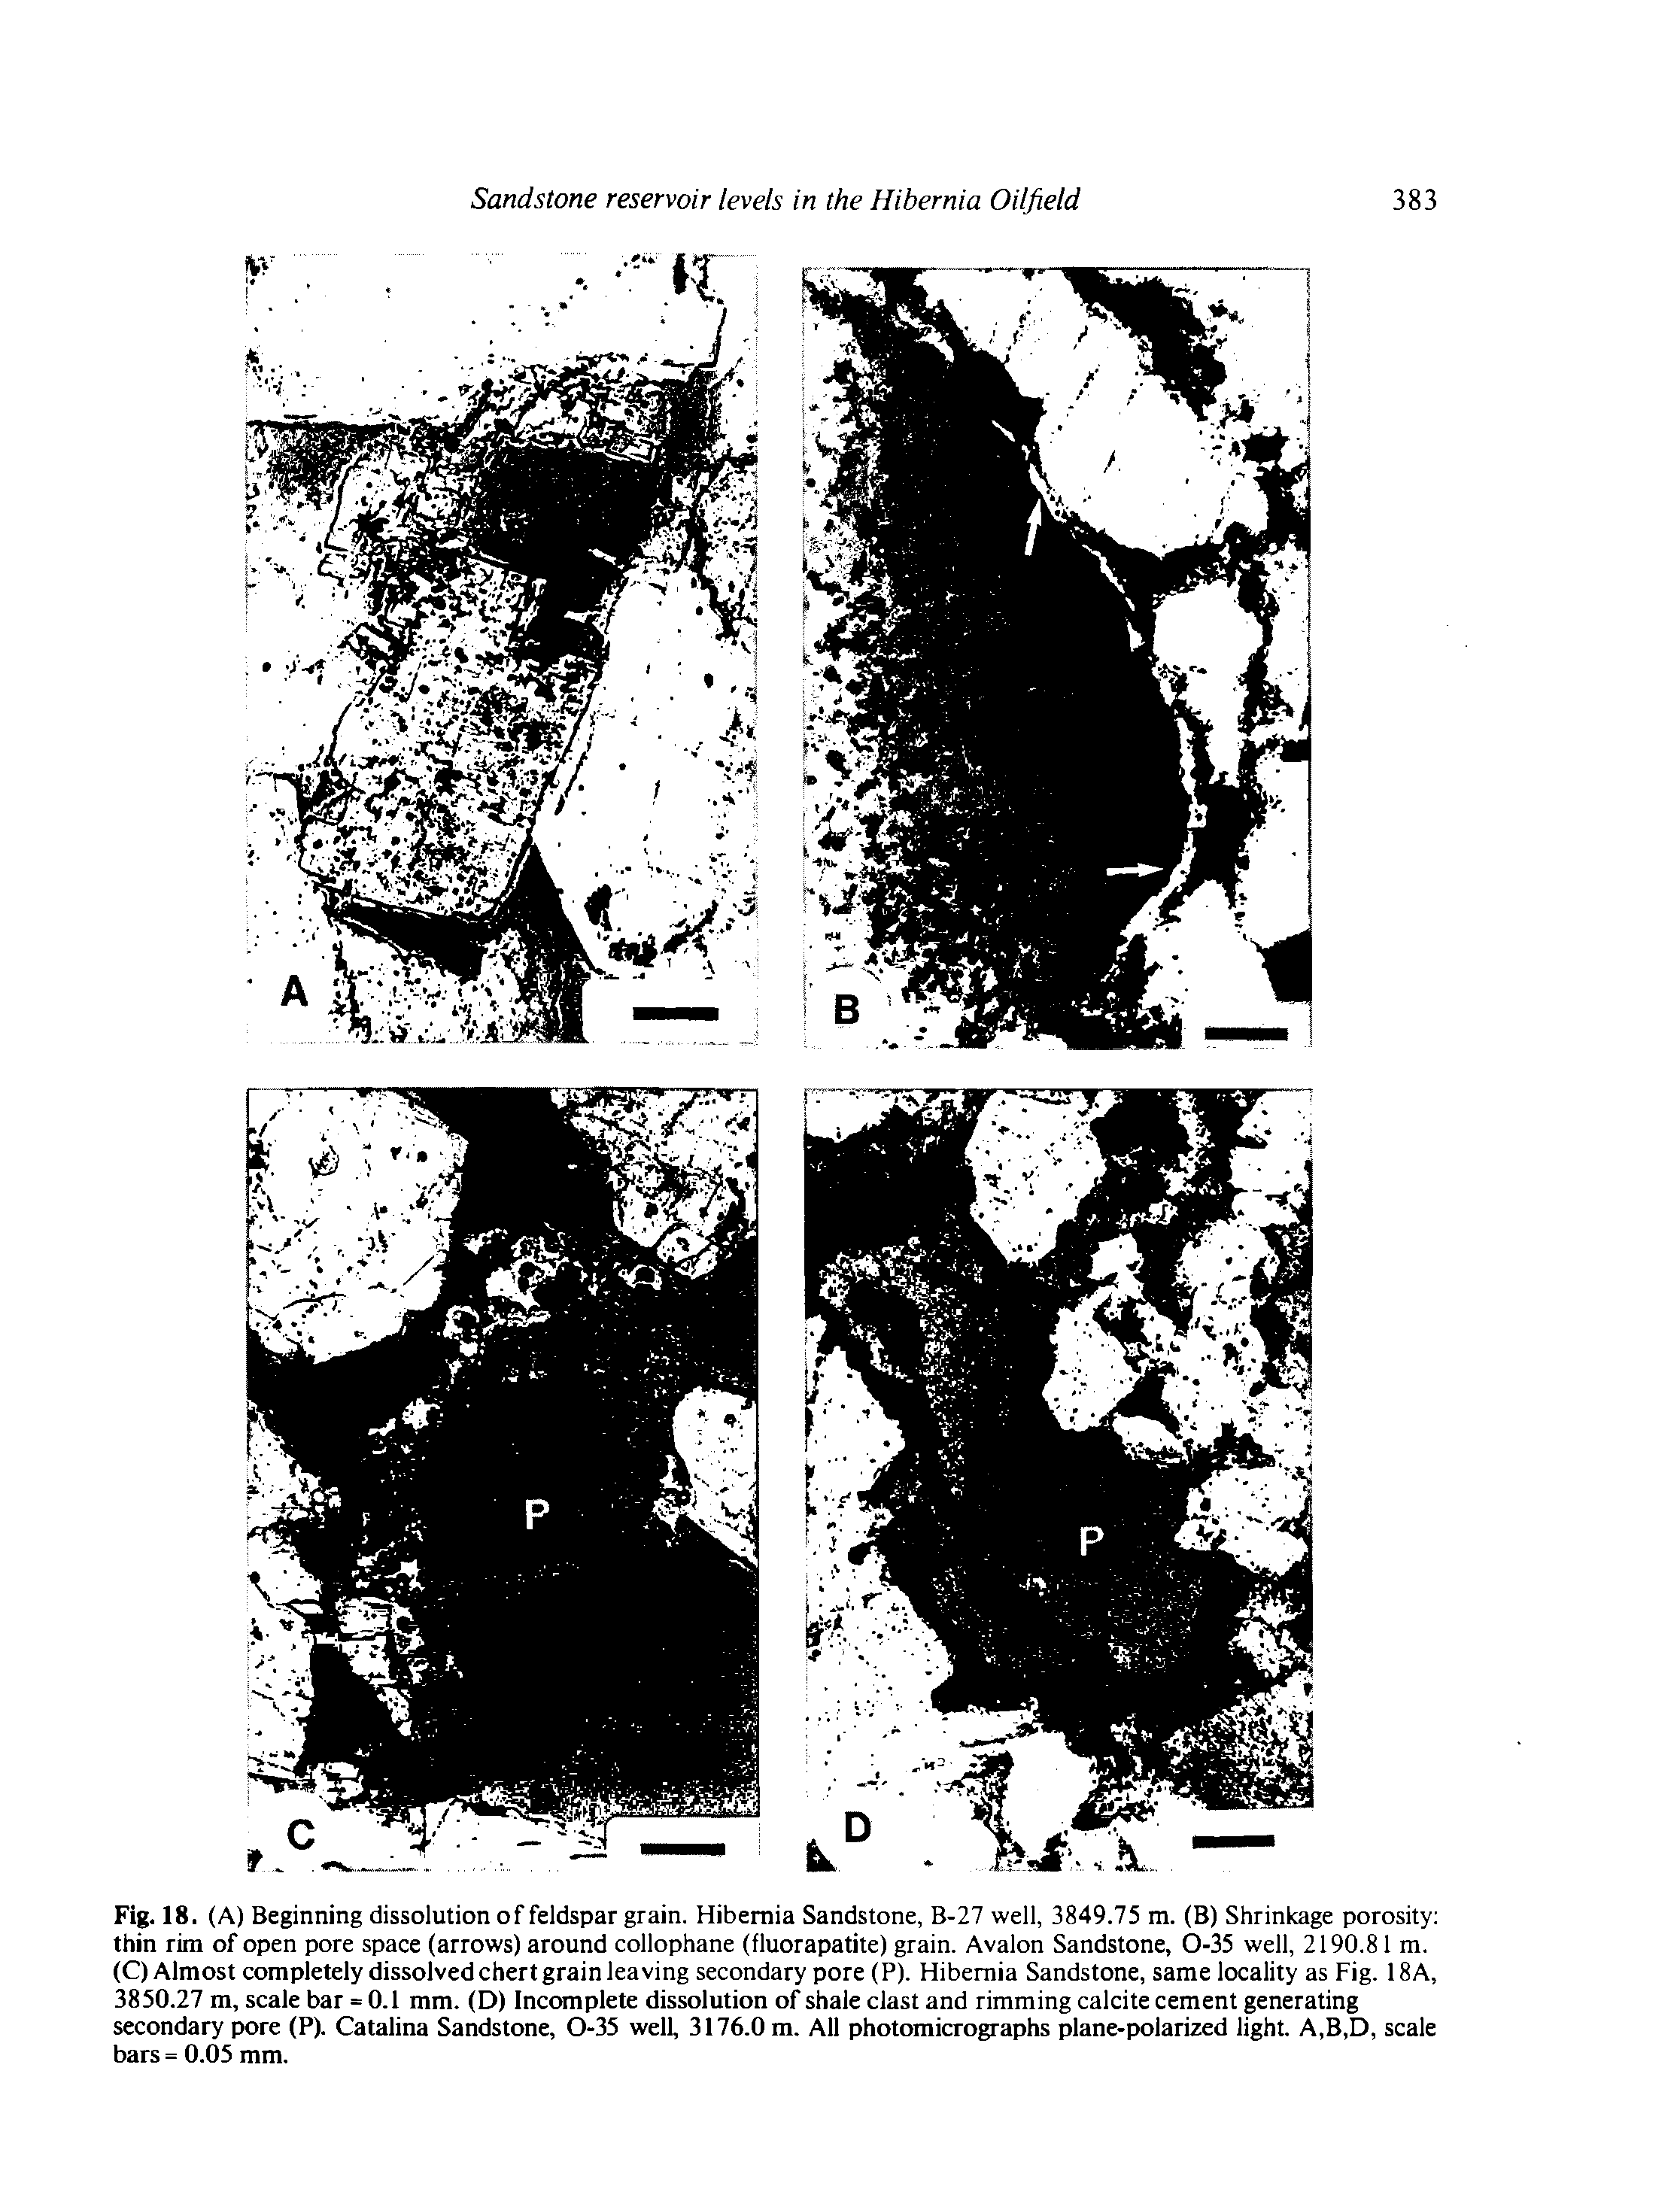 Fig. 18. (A) Beginning dissolution of feldspar grain. Hibernia Sandstone, B-27 well, 3849.75 m. (B) Shrinkage porosity thin rim of open pore space (arrows) around collophane (fluorapatite) grain. Avalon Sandstone, 0-35 well, 2190.81 m. (C) Almost completely dissolved chert grain leaving secondary pore (P). Hibernia Sandstone, same locality as Fig. 18A, 3850.27 m, scale bar = 0.1 mm. (D) Incomplete dissolution of shale clast and rimming calcite cement generating secondary pore (P). Catalina Sandstone, 0-35 well, 3176.0 m. All photomicrographs plane-polarized light. A,B,D, scale bars = 0.05 mm.